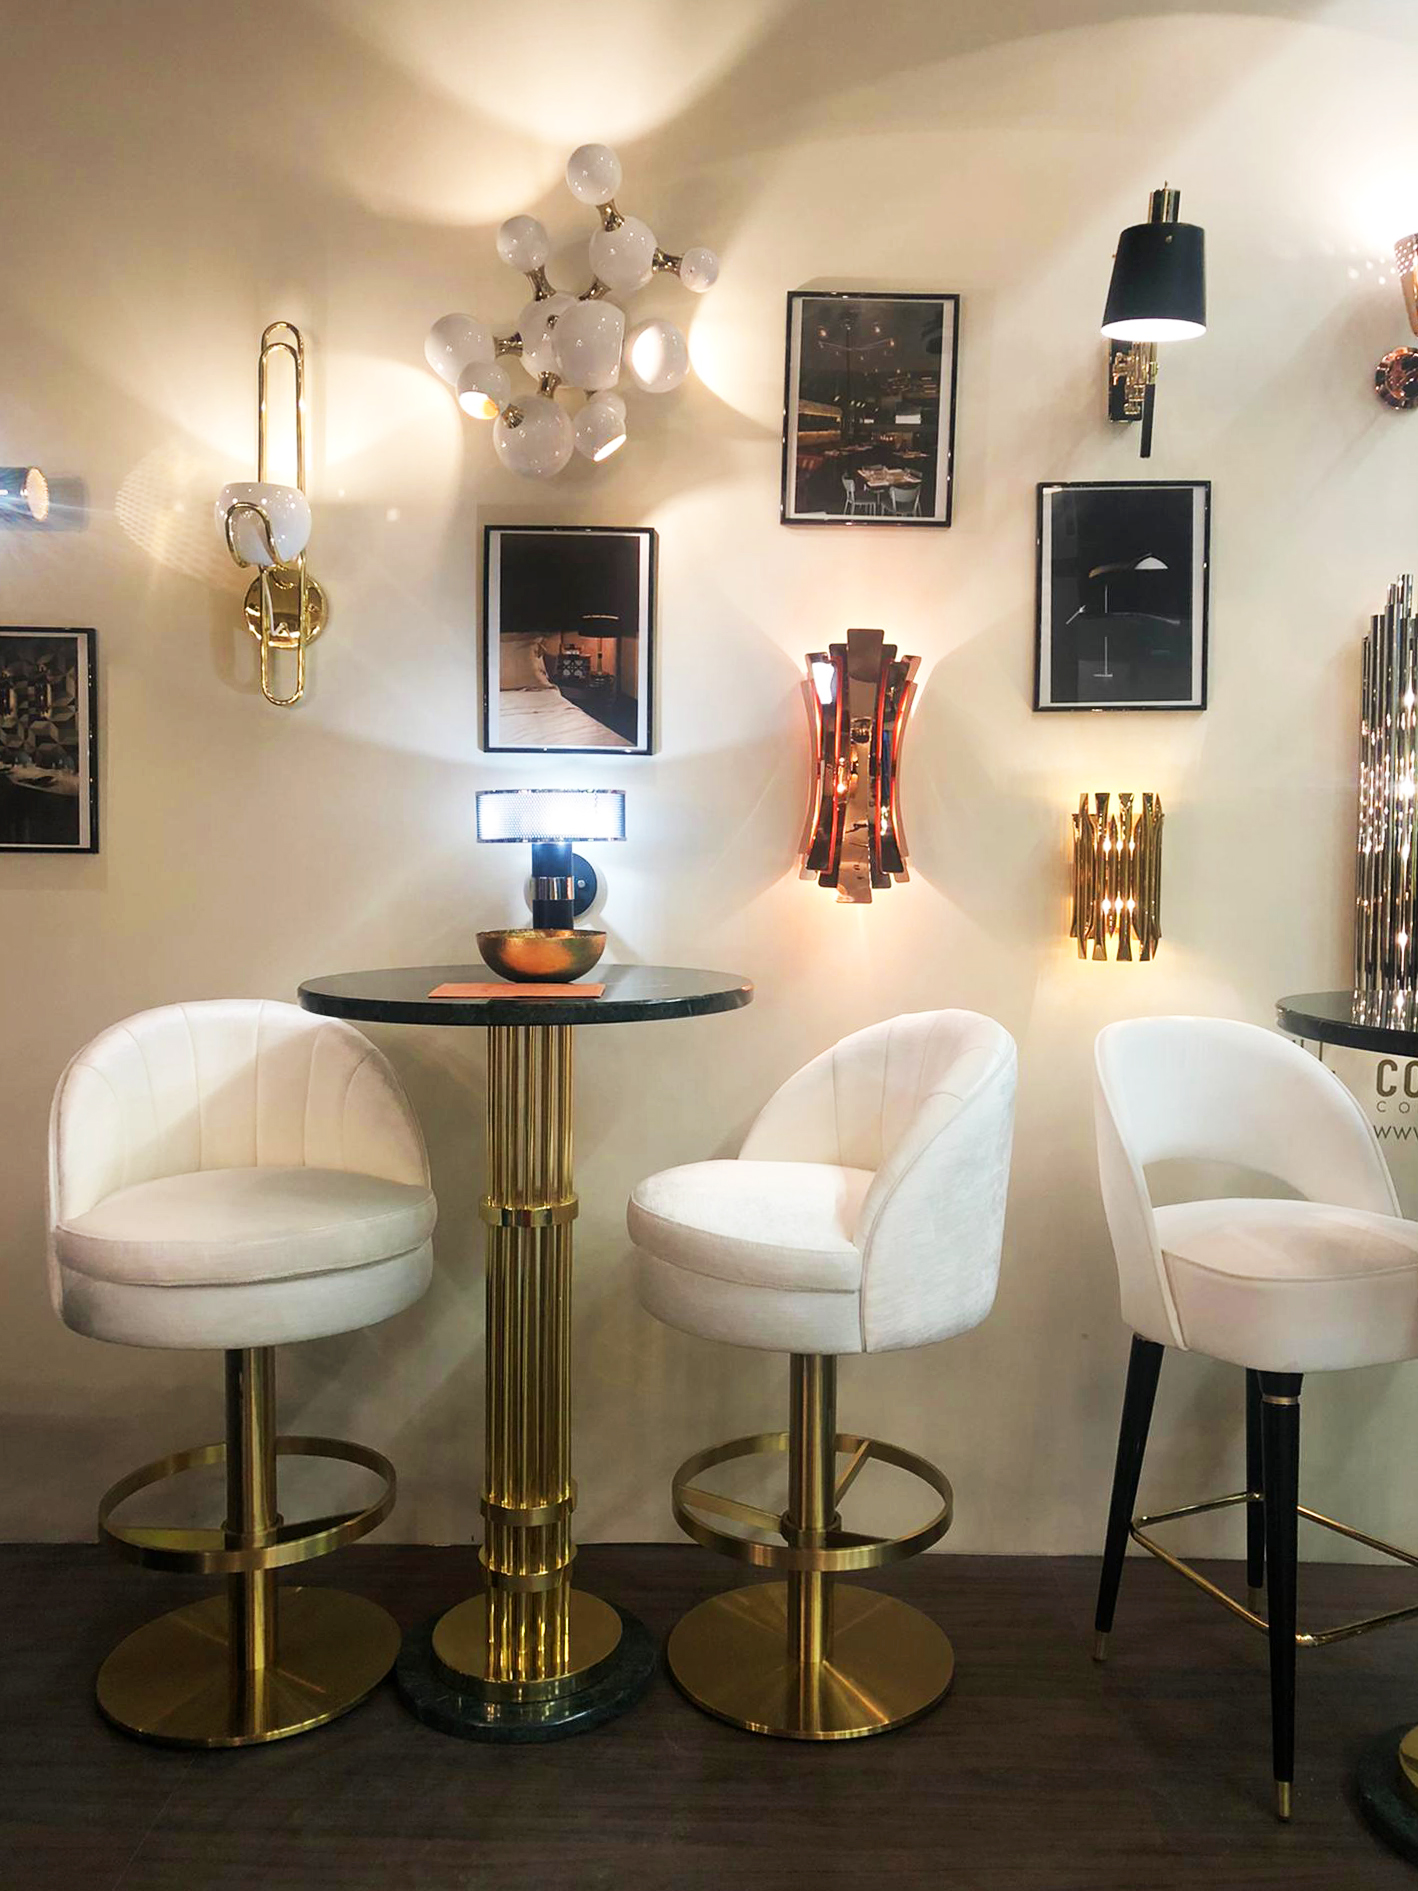 imm Cologne 2020: The First Sneak Peek For All The Vintage Lovers!